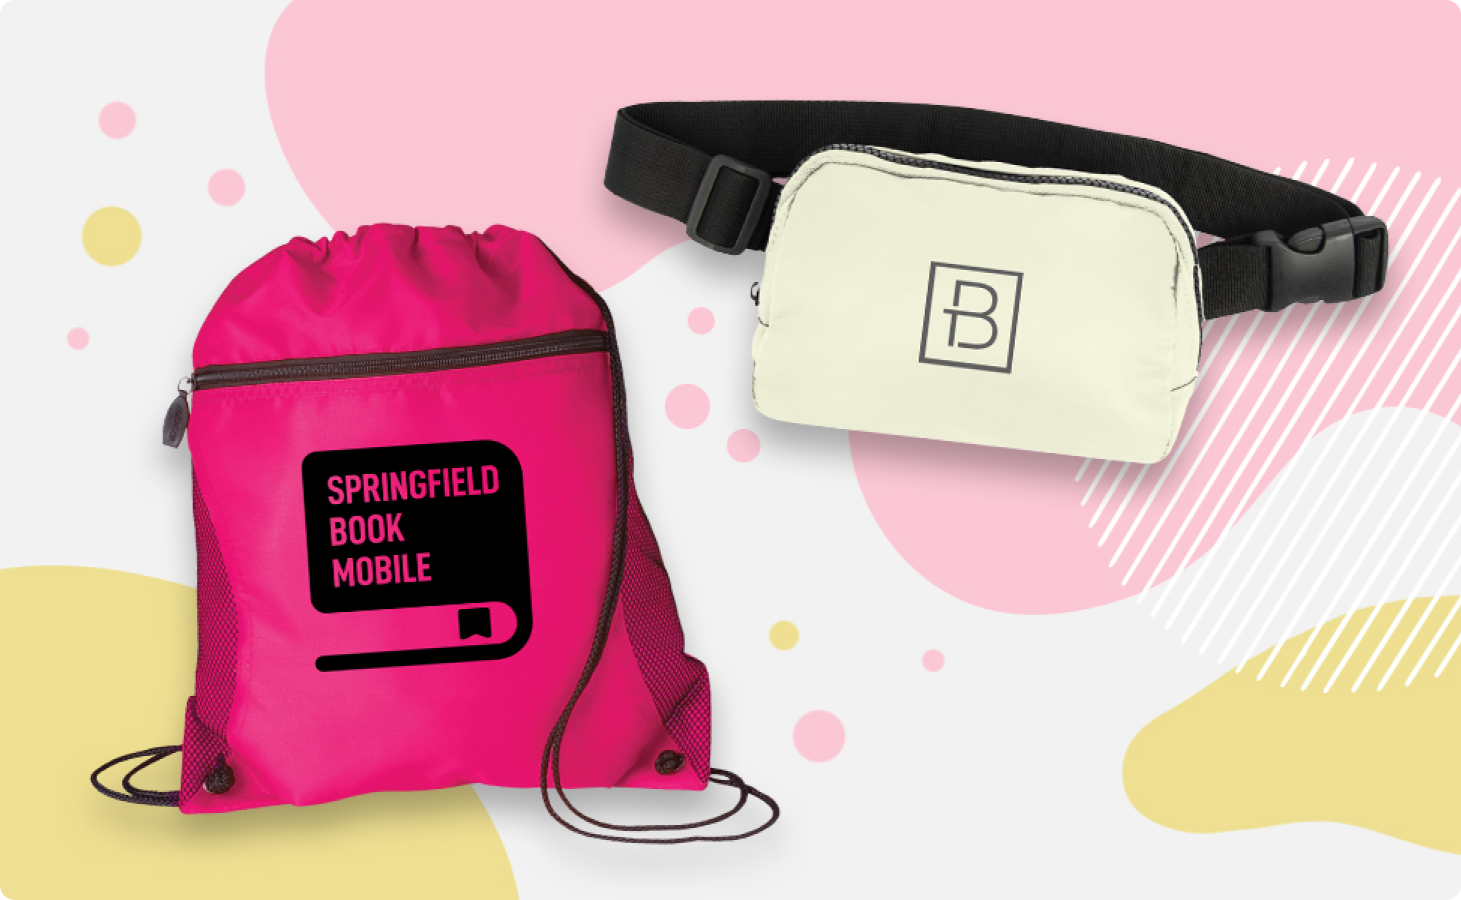 2. Elevate your Marketing Game with Snag-Worthy Bag Swag